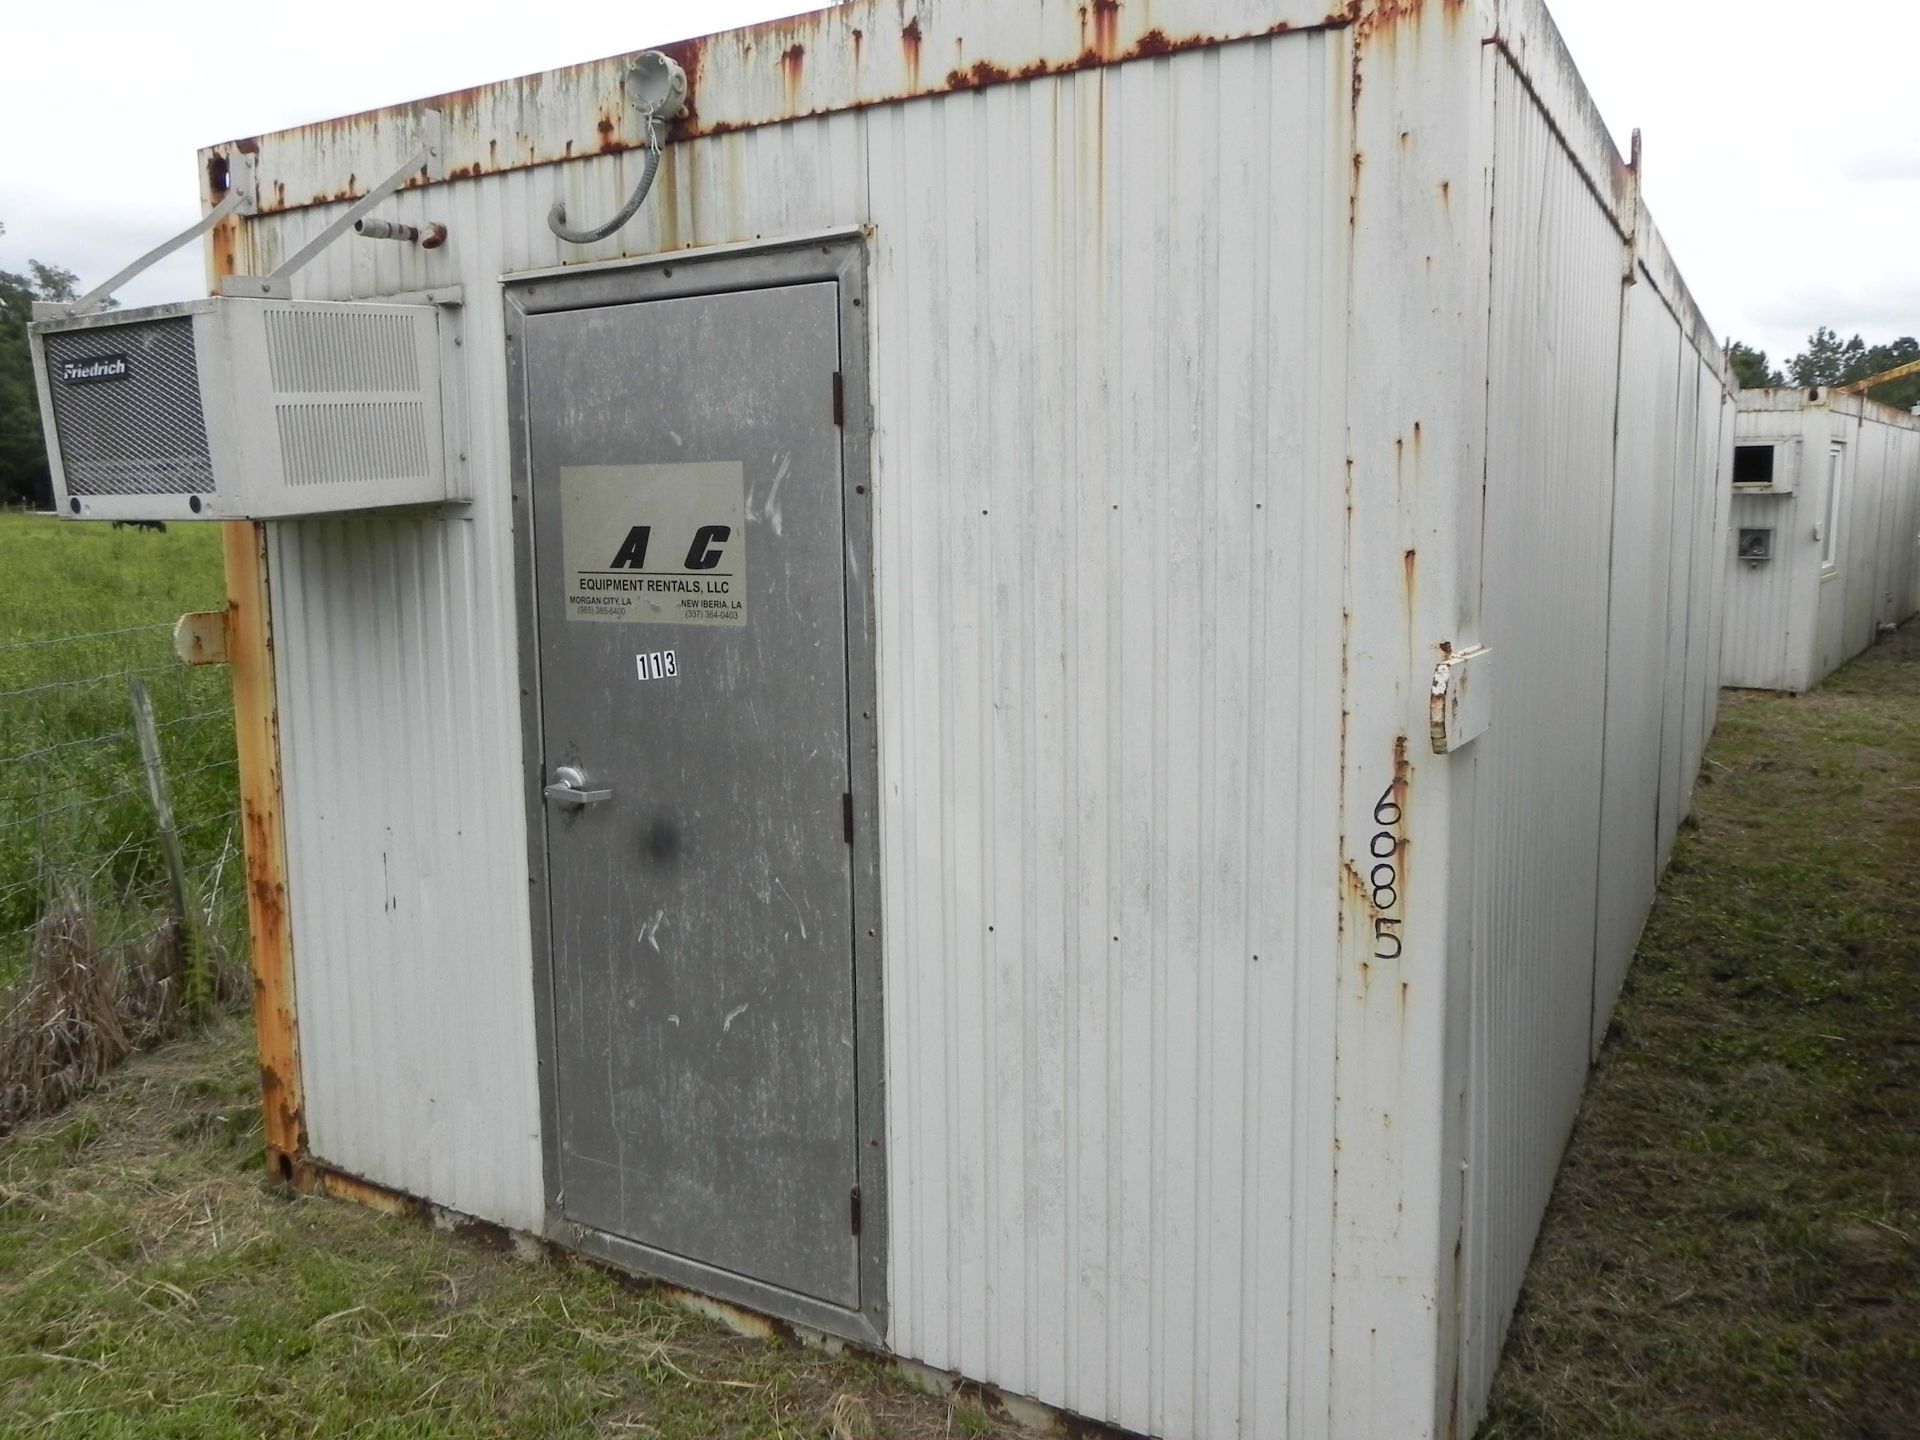 PORTABLE MAN CAMP LIVING QUARTERS, 10' x 32', 12-man sleeper unit, unit #6085. (Located offsite at